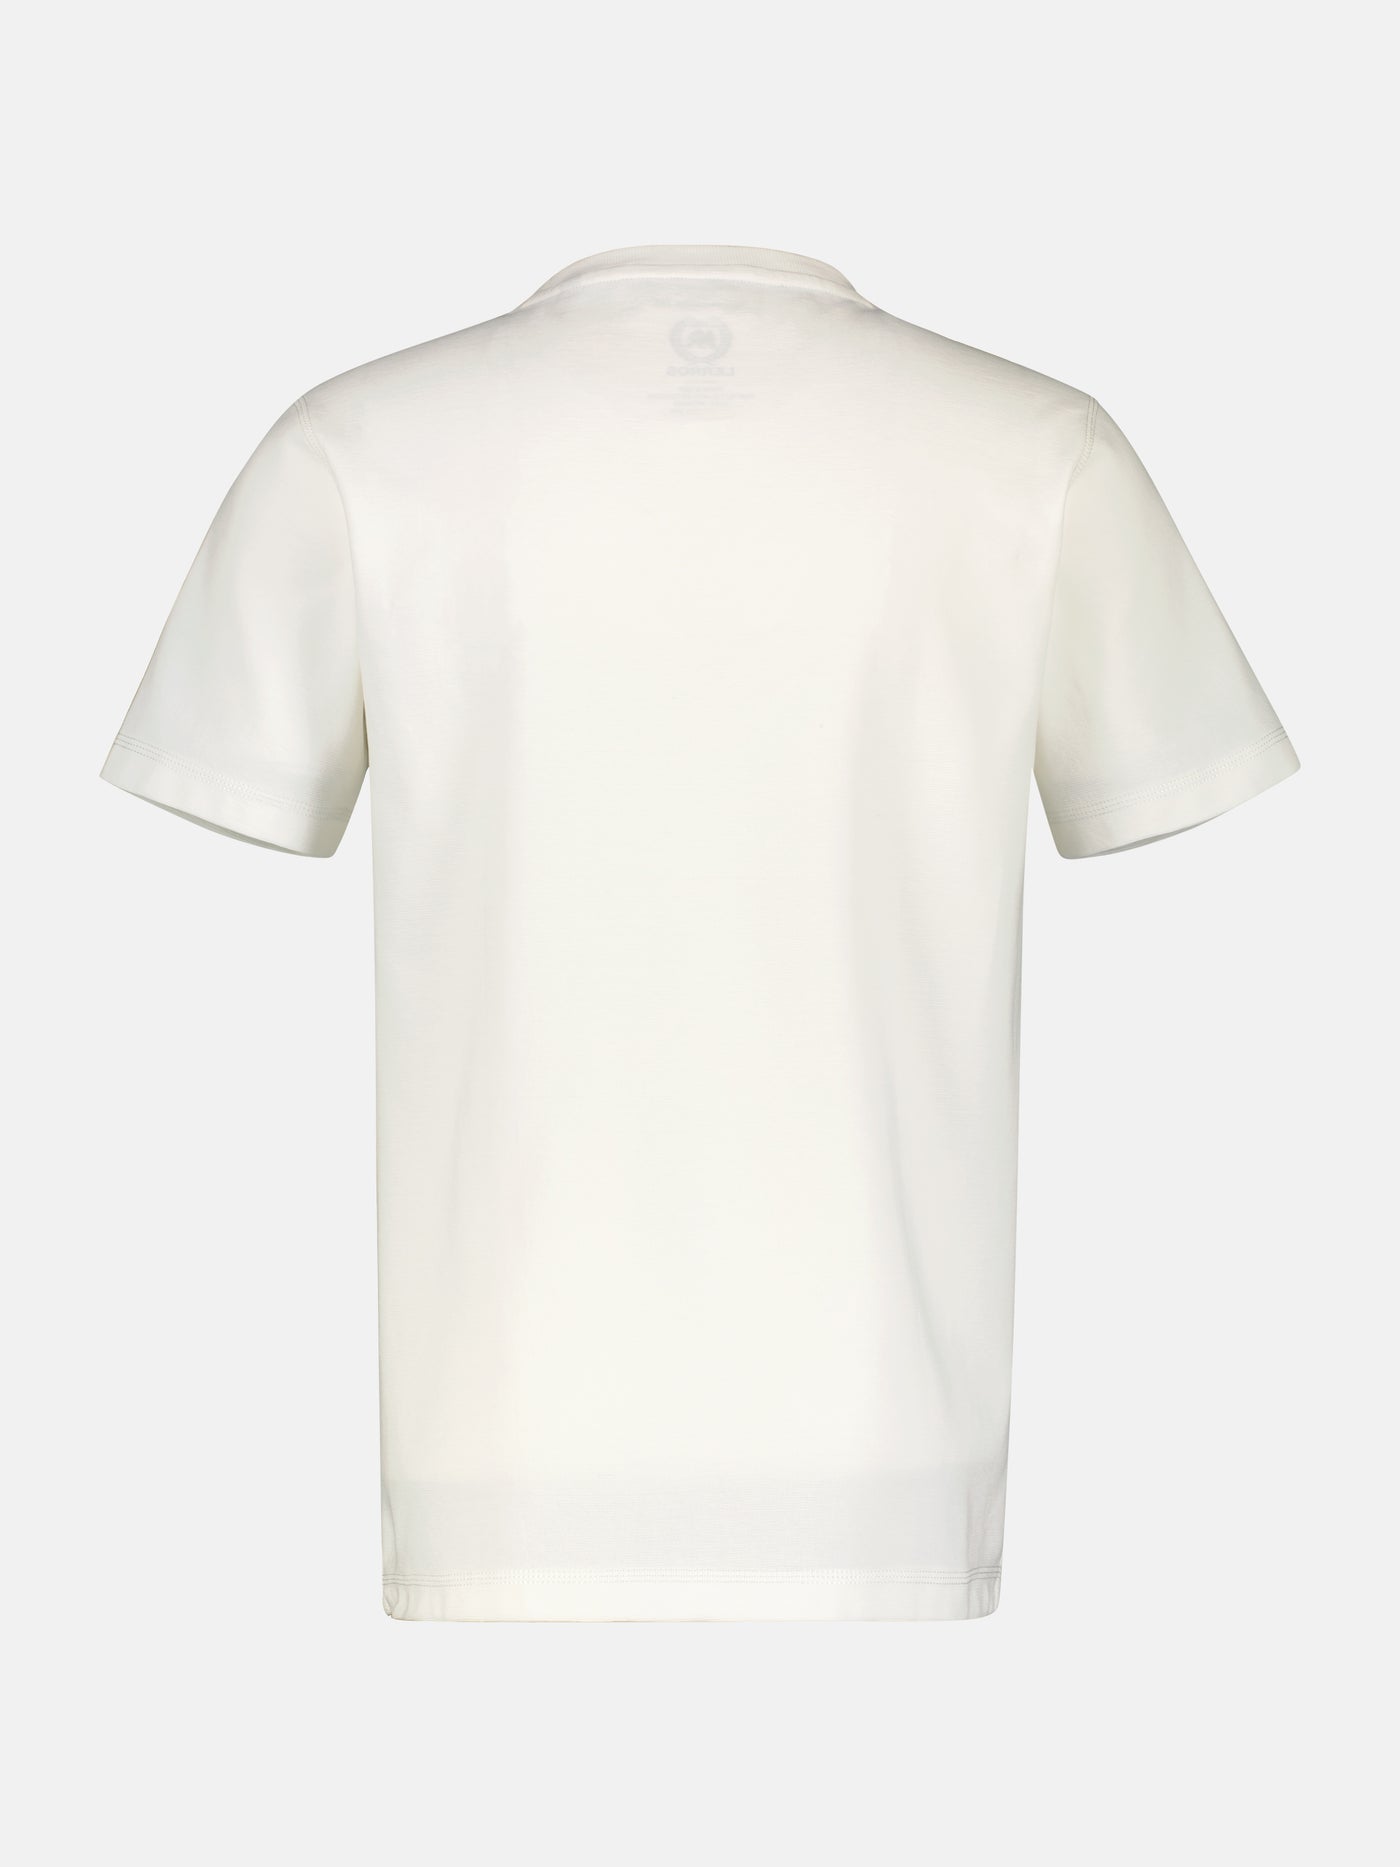 T-shirt in Cool &amp; Dry quality, plain coloured